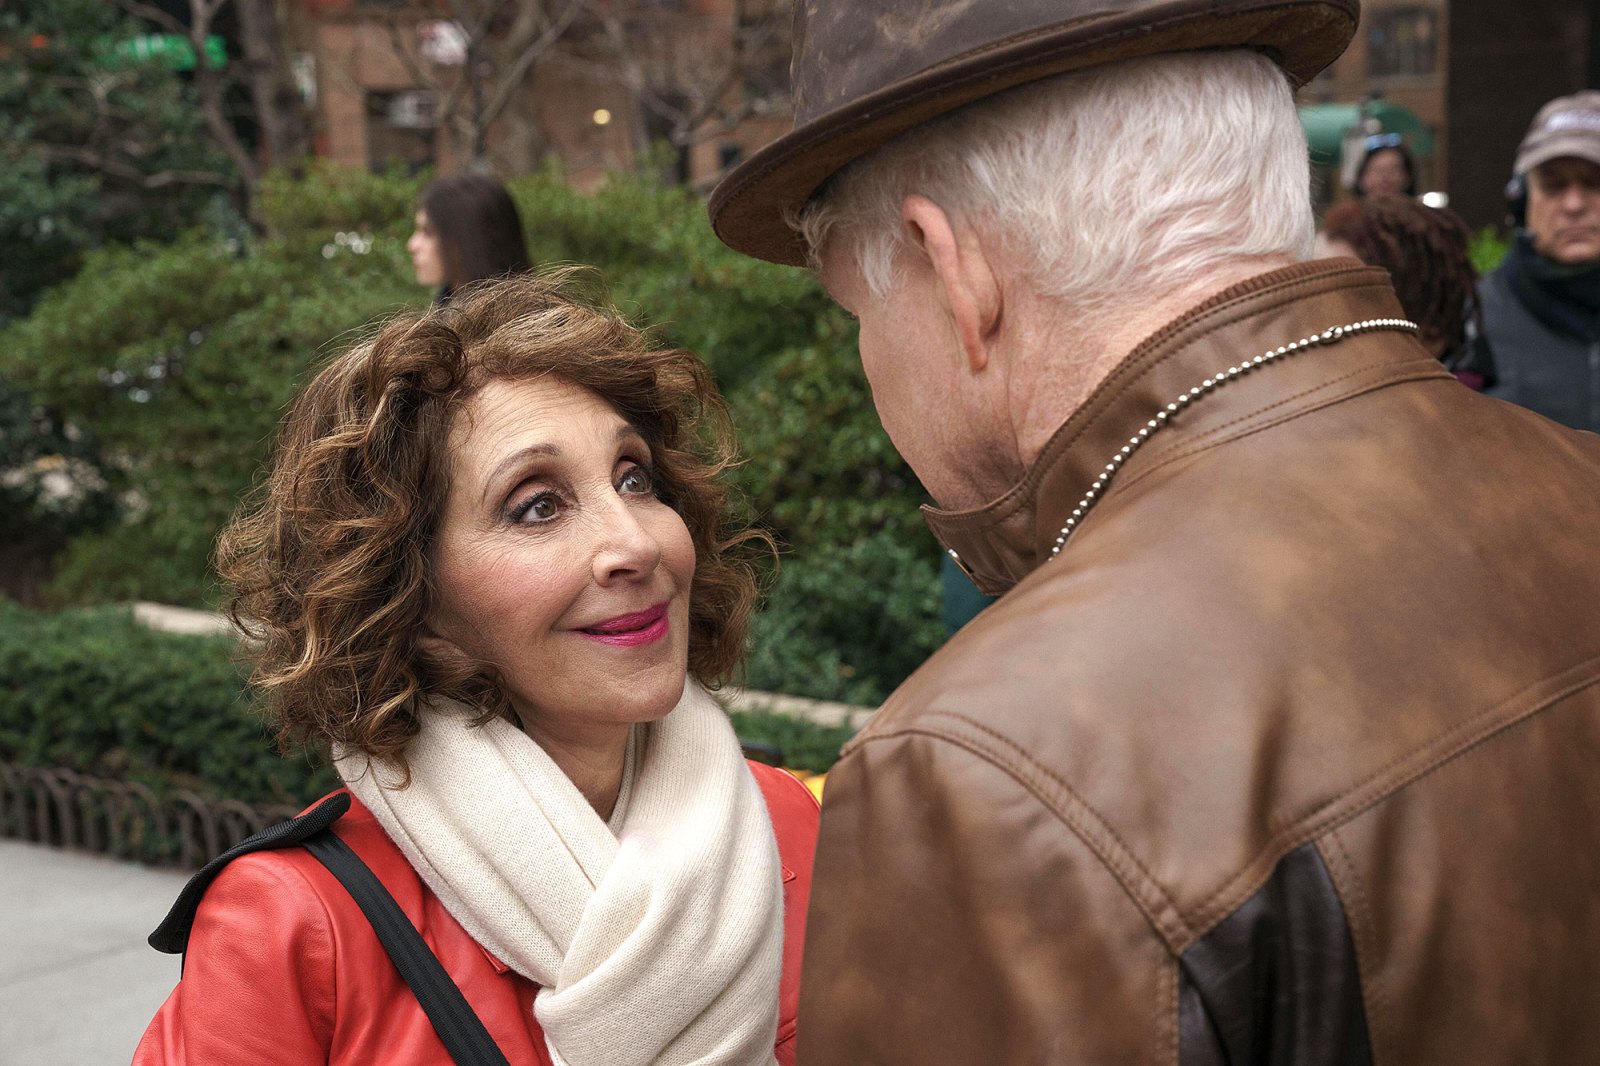 Andrea Martin Every Celebrity Who Has Made a Cameo on Only Murders in the Building